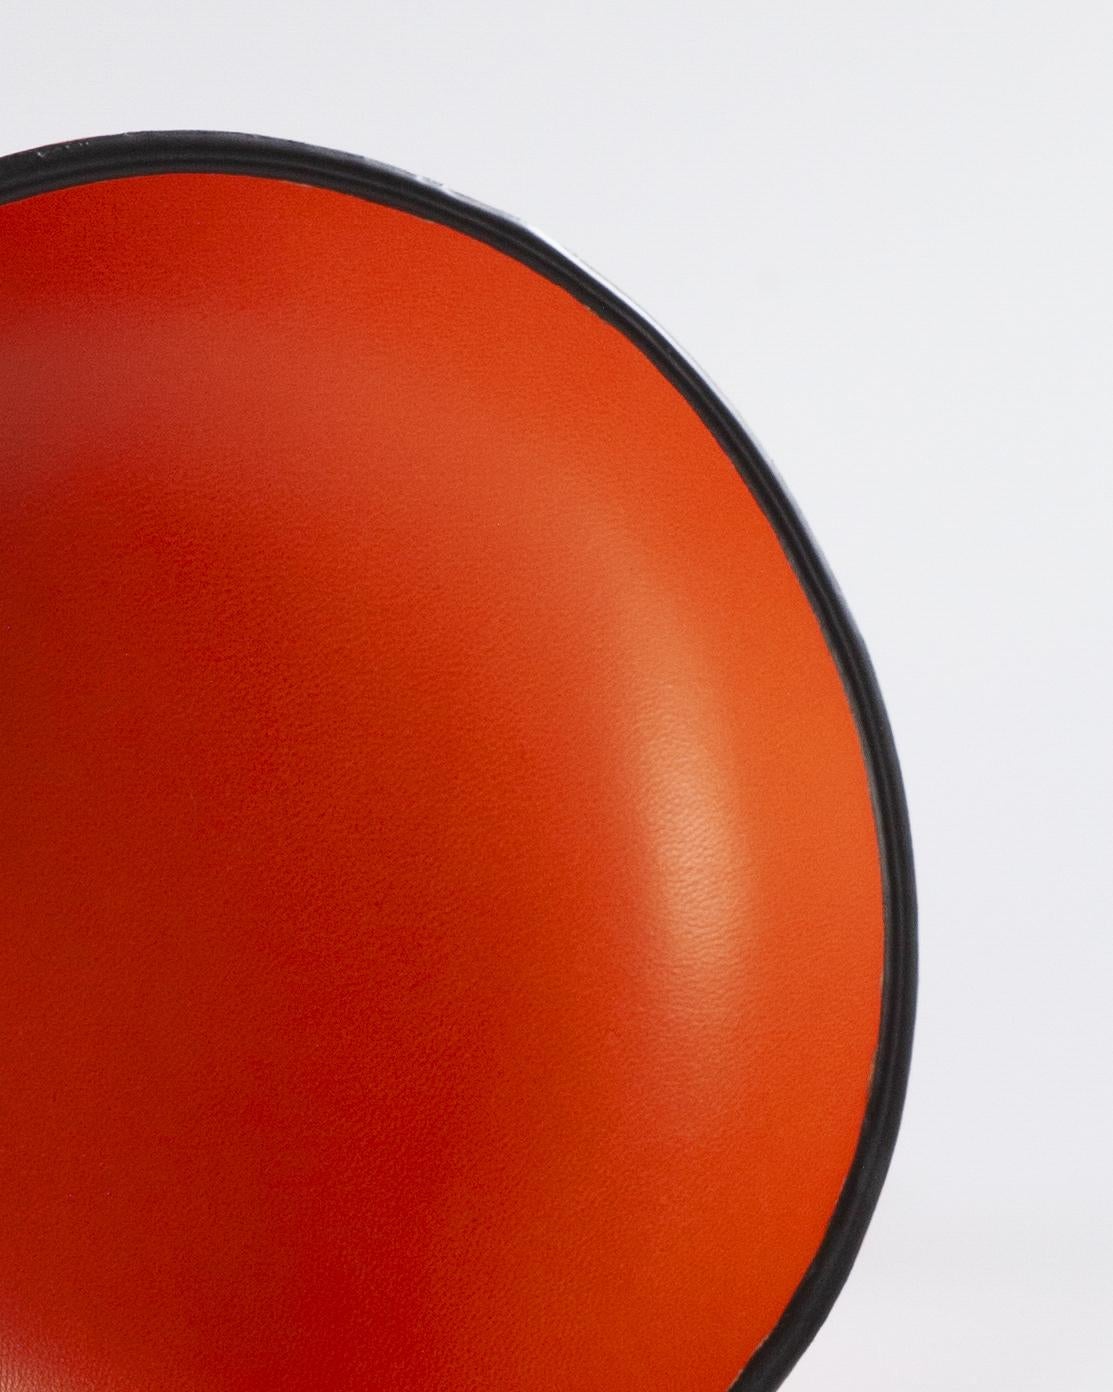 Spanish Handmade Luxury Leather Bowl in Sunset Orange and Black For Sale